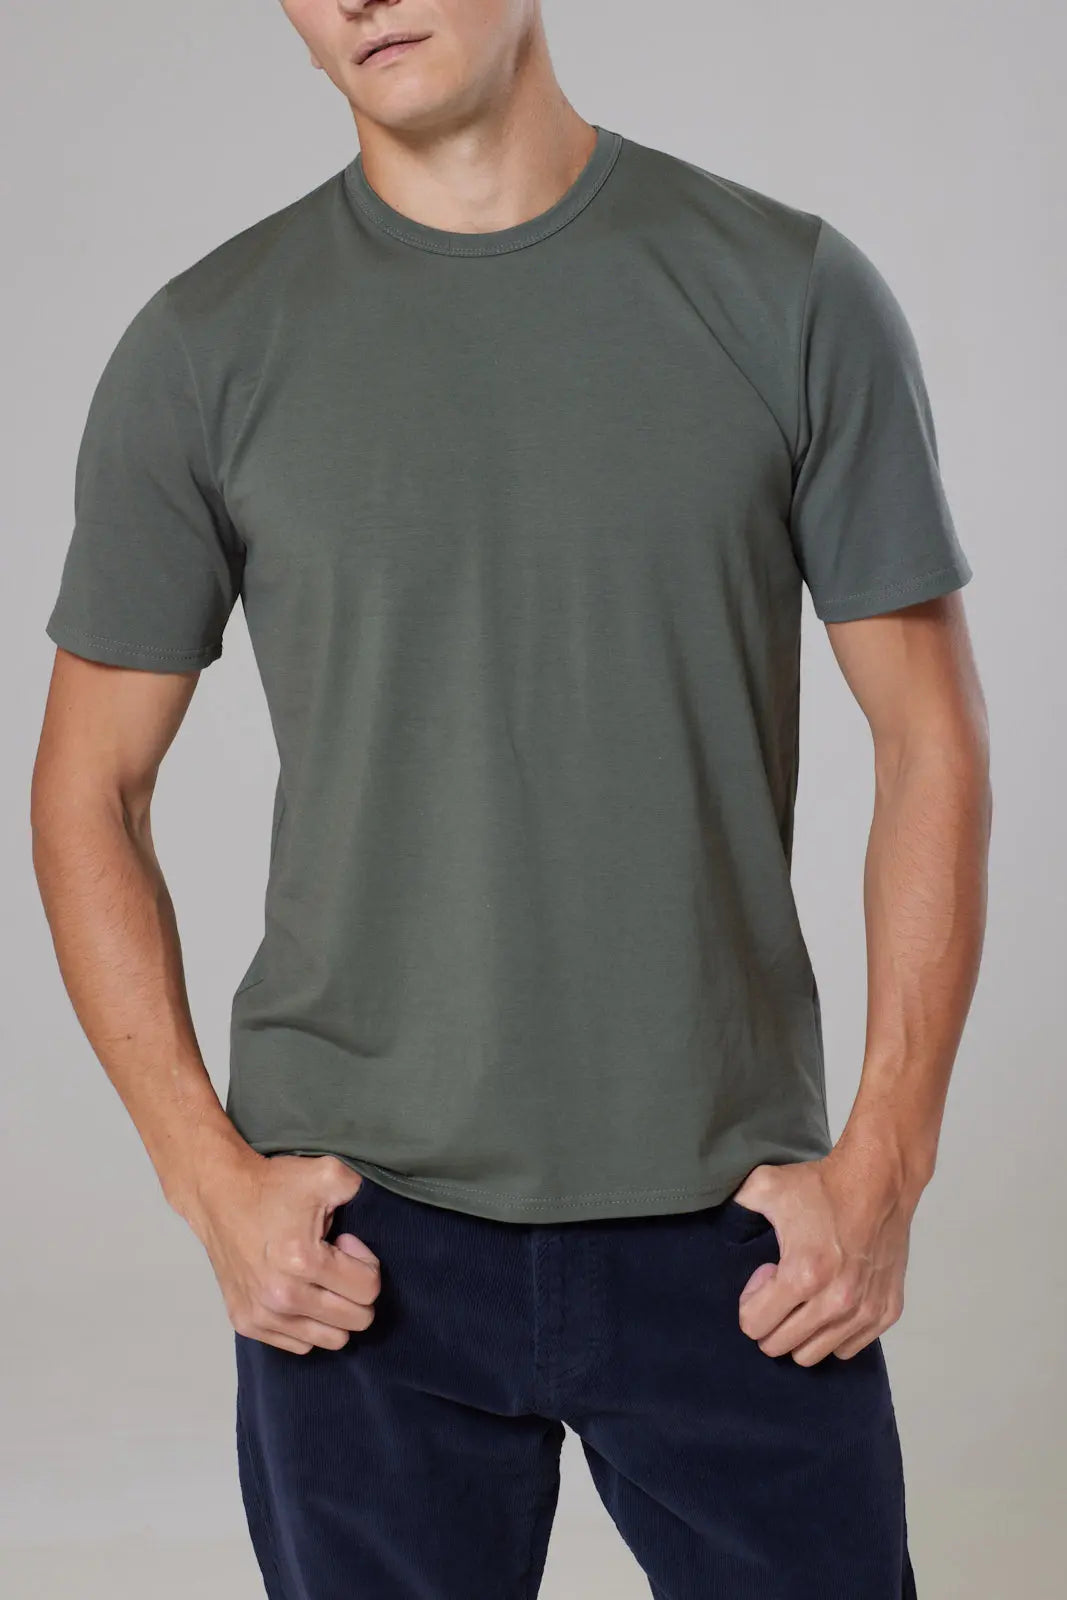 Premium Quality Short Sleeve Cotton T-Shirt for Comfort Style